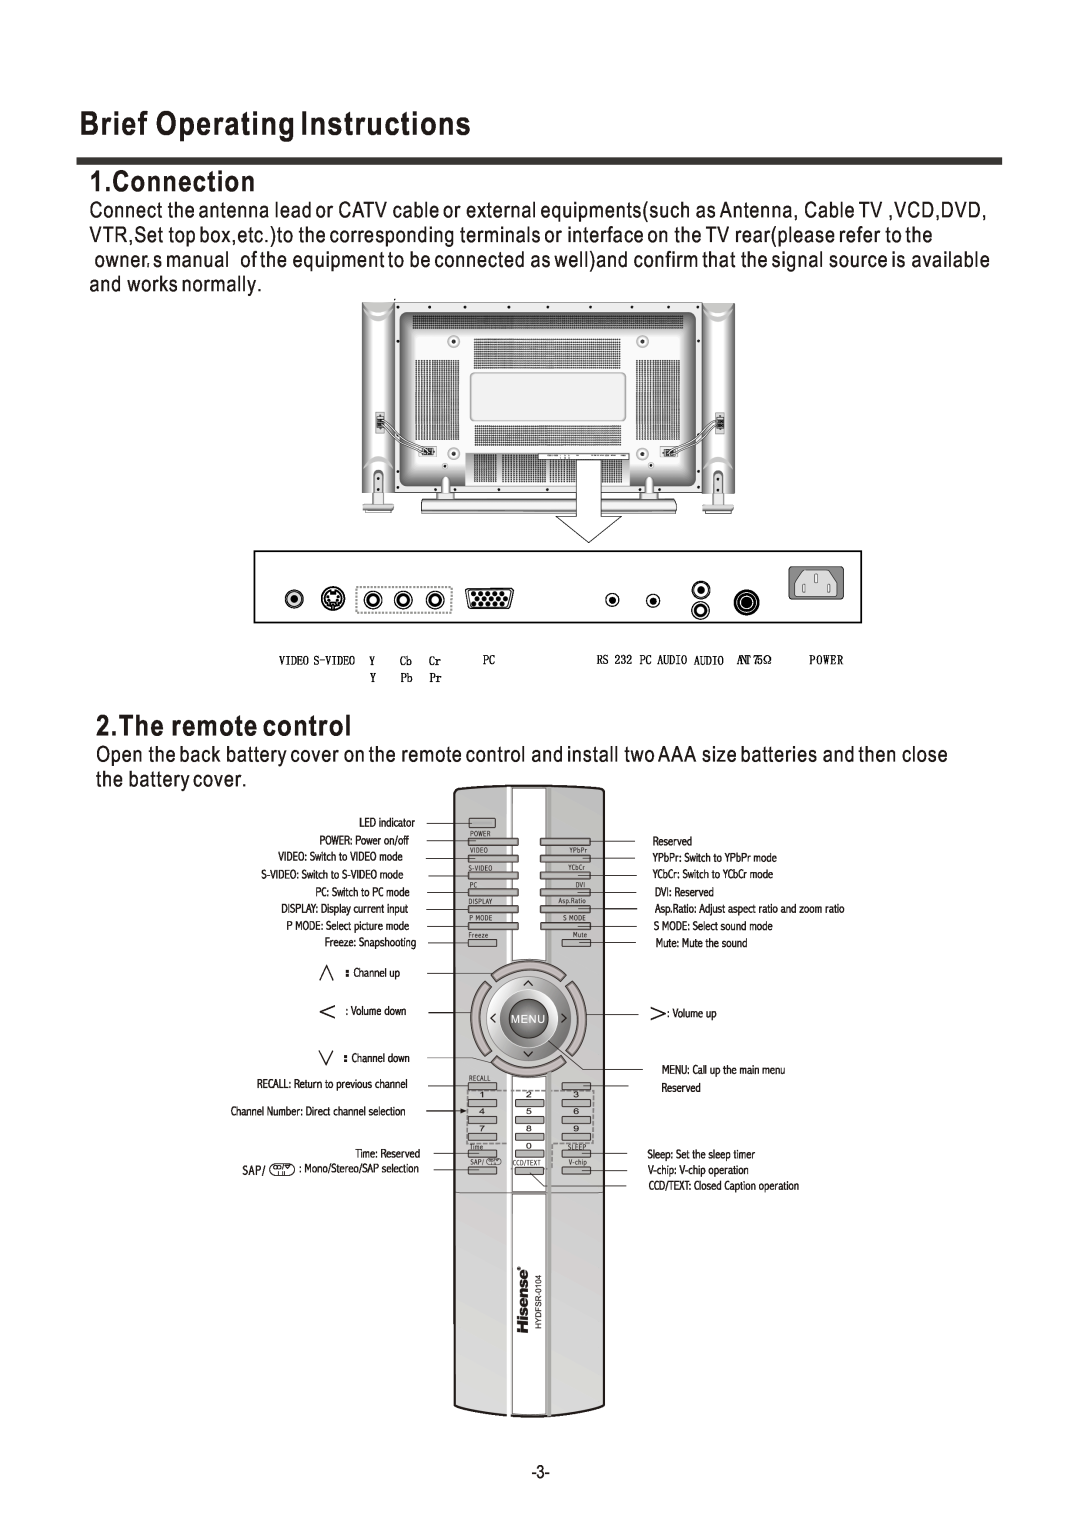 Hisense Group TA42P40M user manual Brief Operating Instructions, Connection, The remote control 